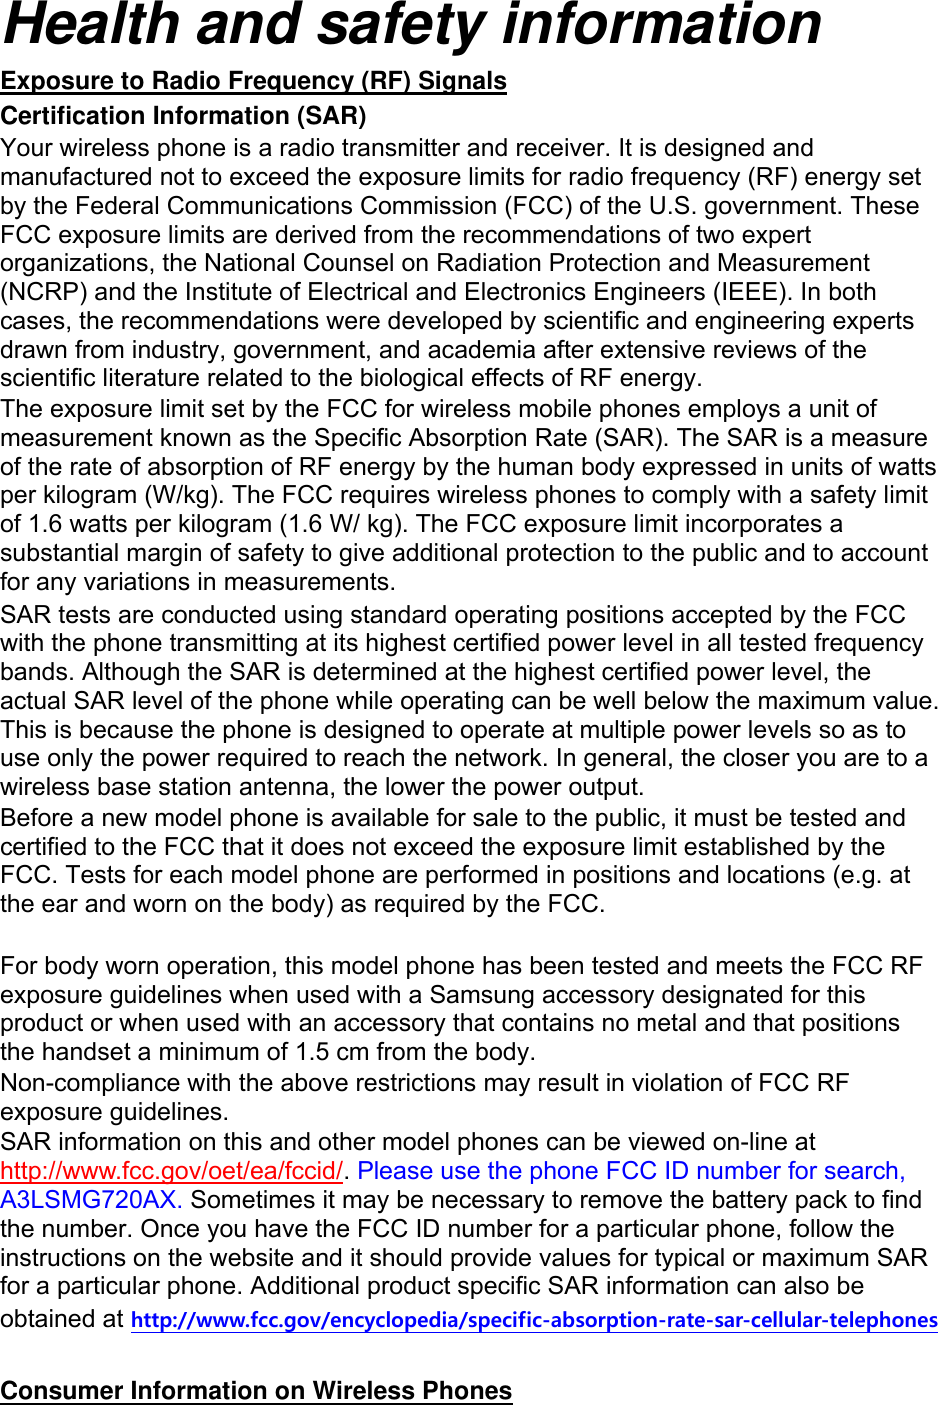 Health and safety information Exposure to Radio Frequency (RF) Signals Certification Information (SAR) Your wireless phone is a radio transmitter and receiver. It is designed and manufactured not to exceed the exposure limits for radio frequency (RF) energy set by the Federal Communications Commission (FCC) of the U.S. government. These FCC exposure limits are derived from the recommendations of two expert organizations, the National Counsel on Radiation Protection and Measurement (NCRP) and the Institute of Electrical and Electronics Engineers (IEEE). In both cases, the recommendations were developed by scientific and engineering experts drawn from industry, government, and academia after extensive reviews of the scientific literature related to the biological effects of RF energy. The exposure limit set by the FCC for wireless mobile phones employs a unit of measurement known as the Specific Absorption Rate (SAR). The SAR is a measure of the rate of absorption of RF energy by the human body expressed in units of watts per kilogram (W/kg). The FCC requires wireless phones to comply with a safety limit of 1.6 watts per kilogram (1.6 W/ kg). The FCC exposure limit incorporates a substantial margin of safety to give additional protection to the public and to account for any variations in measurements. SAR tests are conducted using standard operating positions accepted by the FCC with the phone transmitting at its highest certified power level in all tested frequency bands. Although the SAR is determined at the highest certified power level, the actual SAR level of the phone while operating can be well below the maximum value. This is because the phone is designed to operate at multiple power levels so as to use only the power required to reach the network. In general, the closer you are to a wireless base station antenna, the lower the power output. Before a new model phone is available for sale to the public, it must be tested and certified to the FCC that it does not exceed the exposure limit established by the FCC. Tests for each model phone are performed in positions and locations (e.g. at the ear and worn on the body) as required by the FCC.      For body worn operation, this model phone has been tested and meets the FCC RF exposure guidelines when used with a Samsung accessory designated for this product or when used with an accessory that contains no metal and that positions the handset a minimum of 1.5 cm from the body.   Non-compliance with the above restrictions may result in violation of FCC RF exposure guidelines. SAR information on this and other model phones can be viewed on-line at http://www.fcc.gov/oet/ea/fccid/. Please use the phone FCC ID number for search, A3LSMG720AX. Sometimes it may be necessary to remove the battery pack to find the number. Once you have the FCC ID number for a particular phone, follow the instructions on the website and it should provide values for typical or maximum SAR for a particular phone. Additional product specific SAR information can also be obtained at http://www.fcc.gov/encyclopedia/specific-absorption-rate-sar-cellular-telephones  Consumer Information on Wireless Phones 